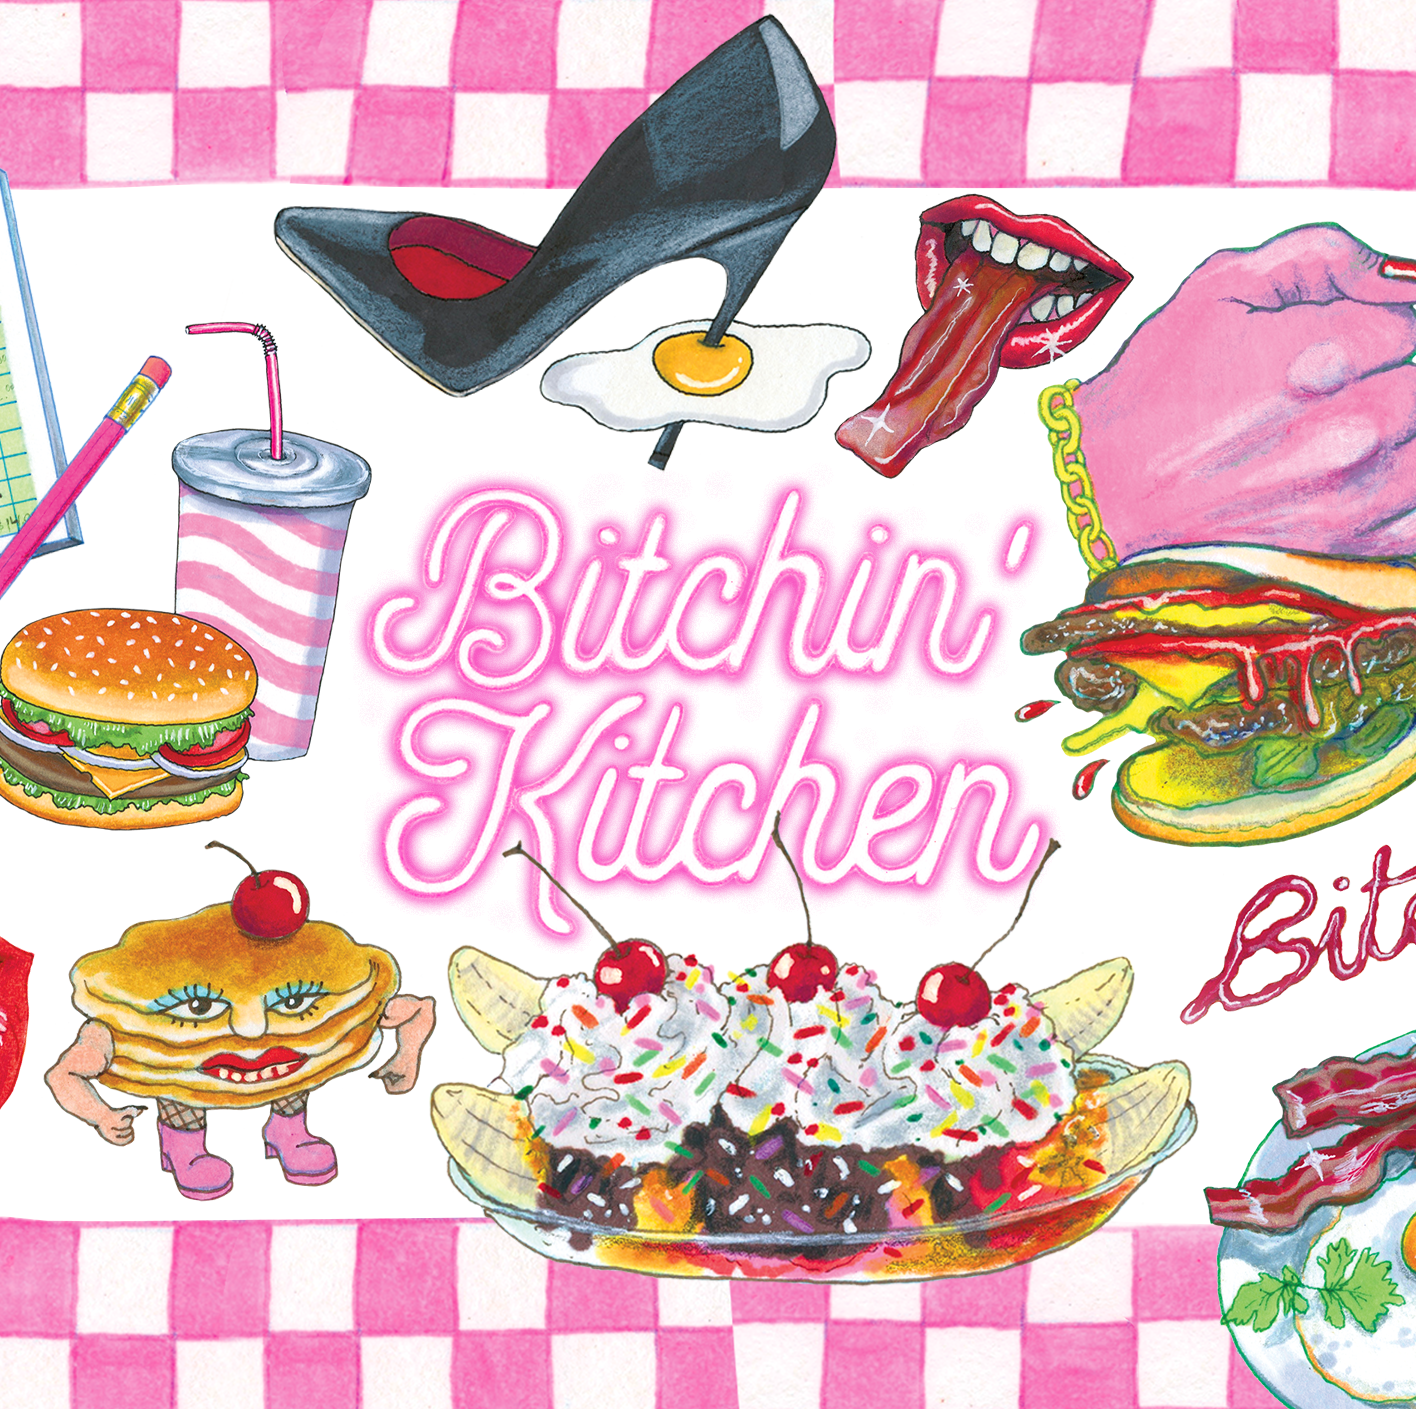 My Journey Into the World of Bitch-Themed Restaurants